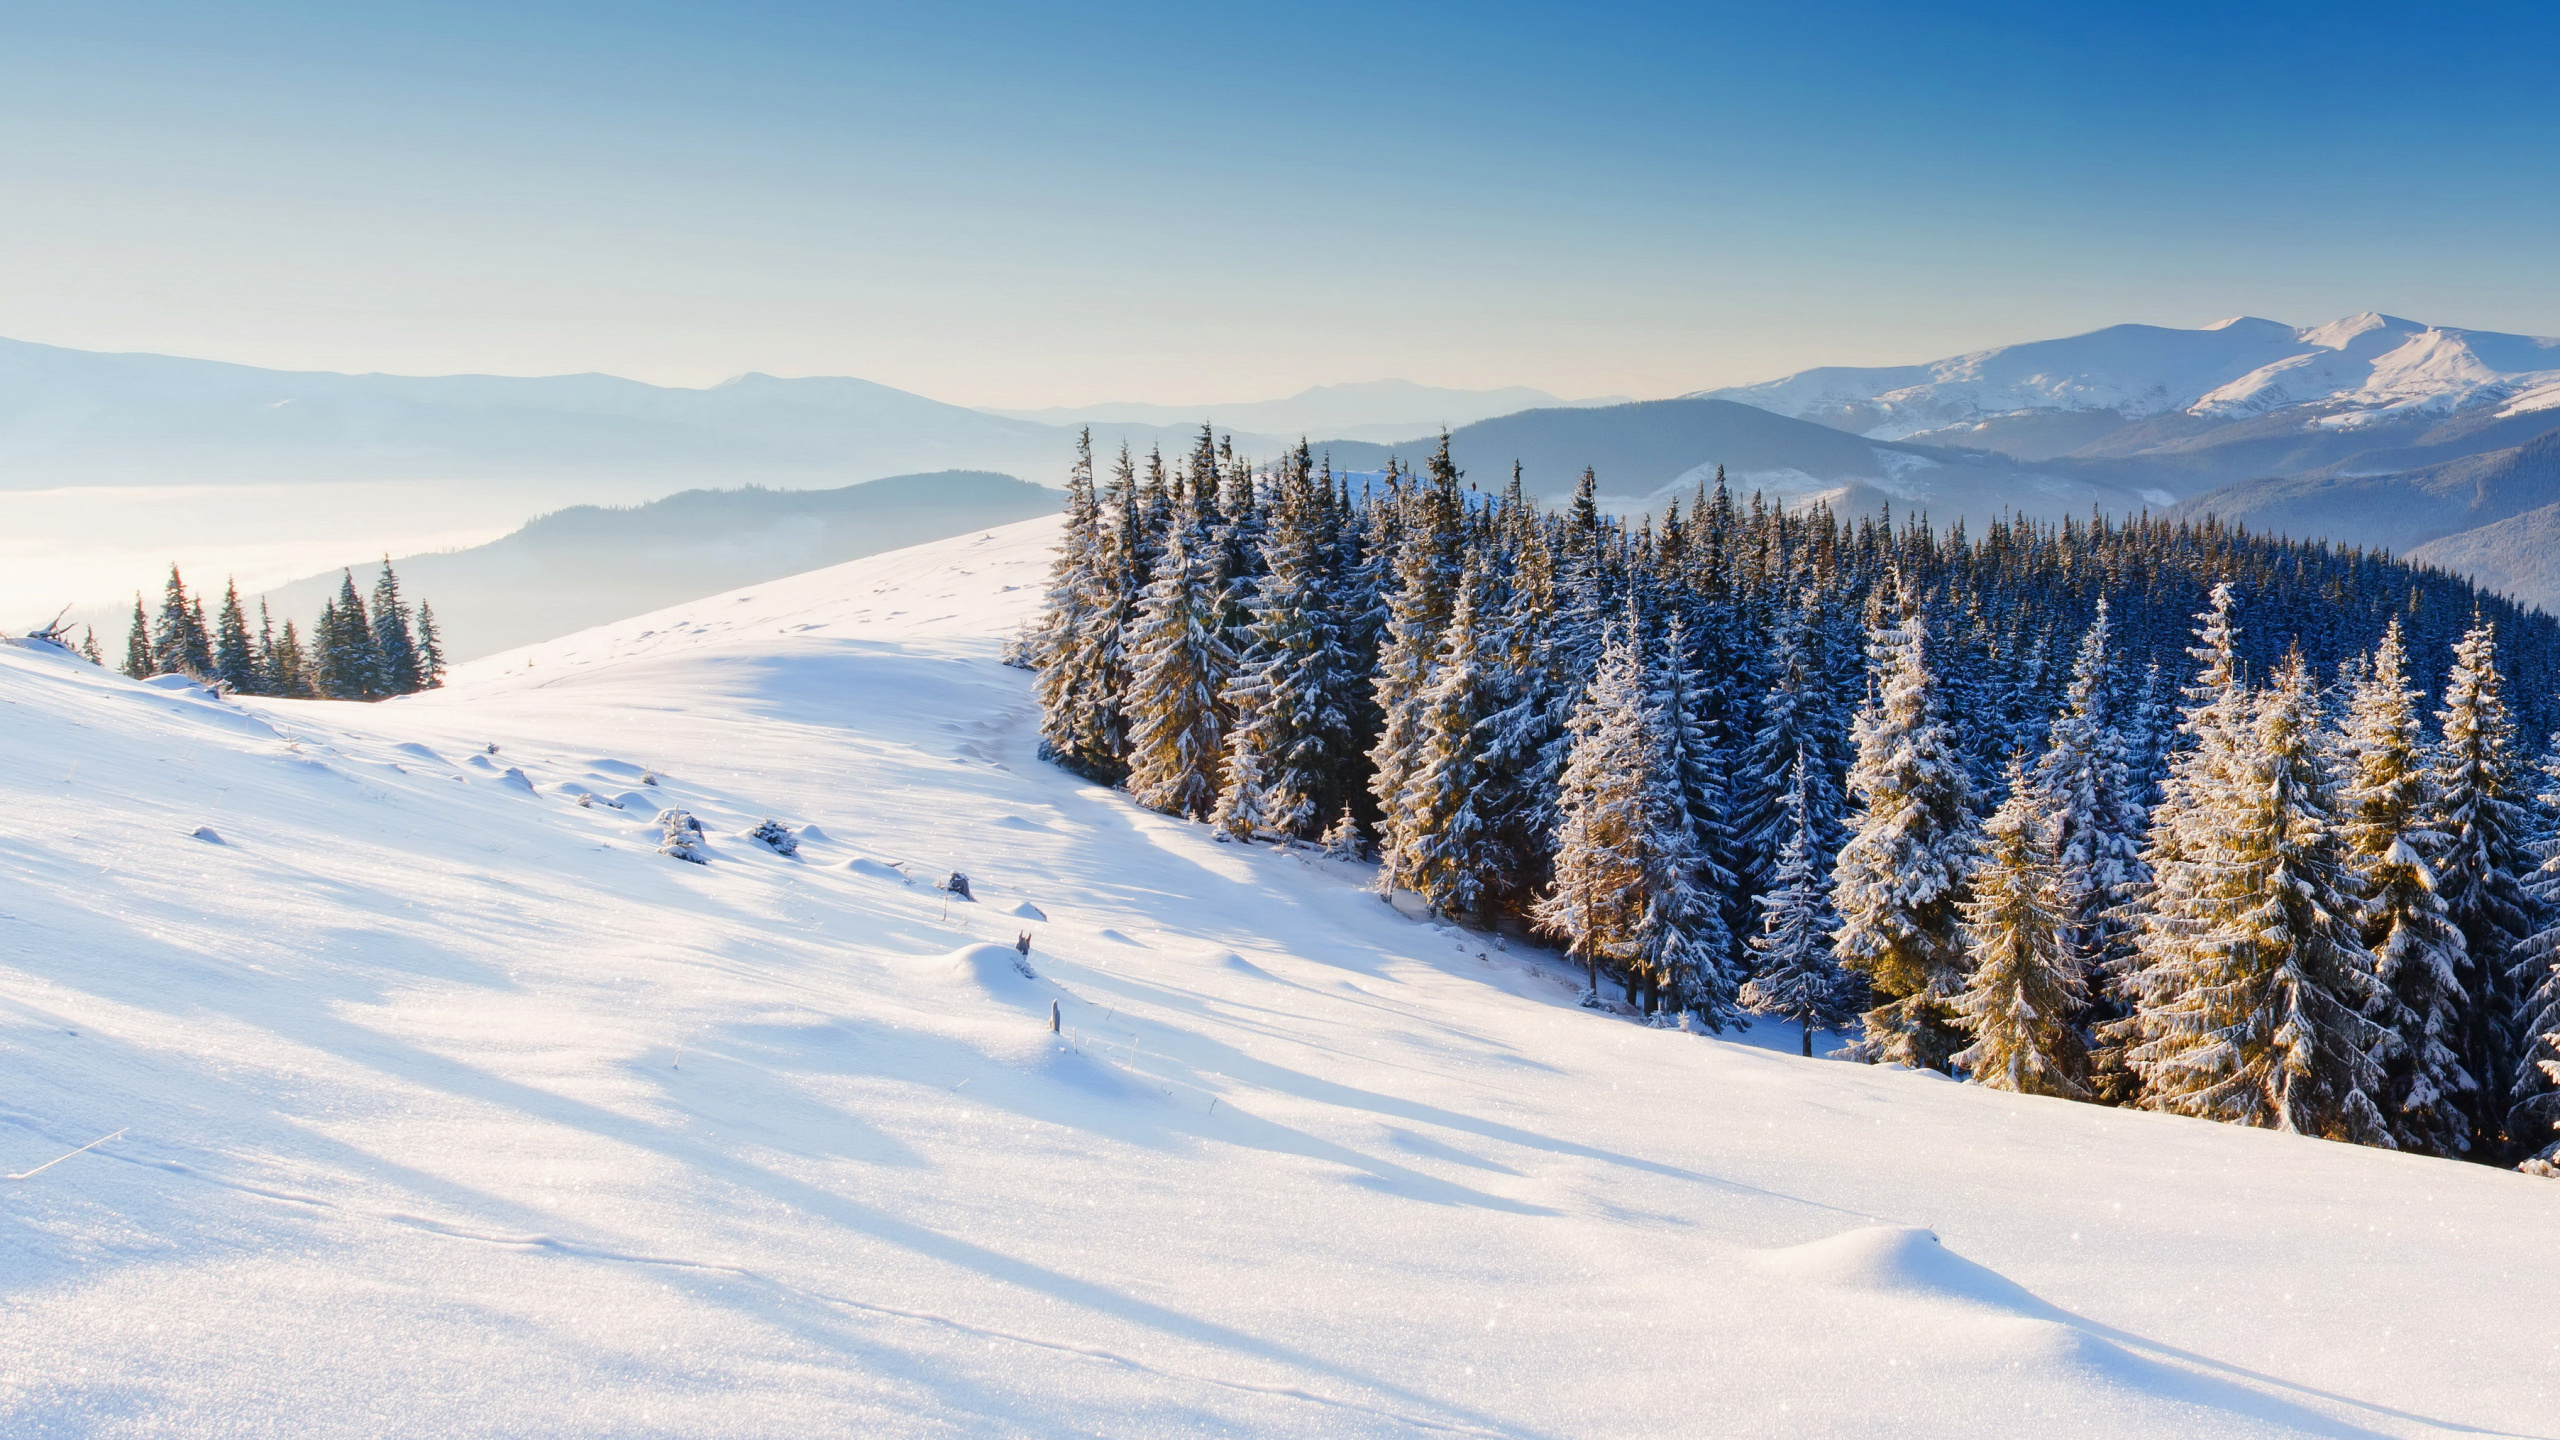 Green Pine Trees on Snow Covered Ground During Daytime. Wallpaper in 2560x1440 Resolution